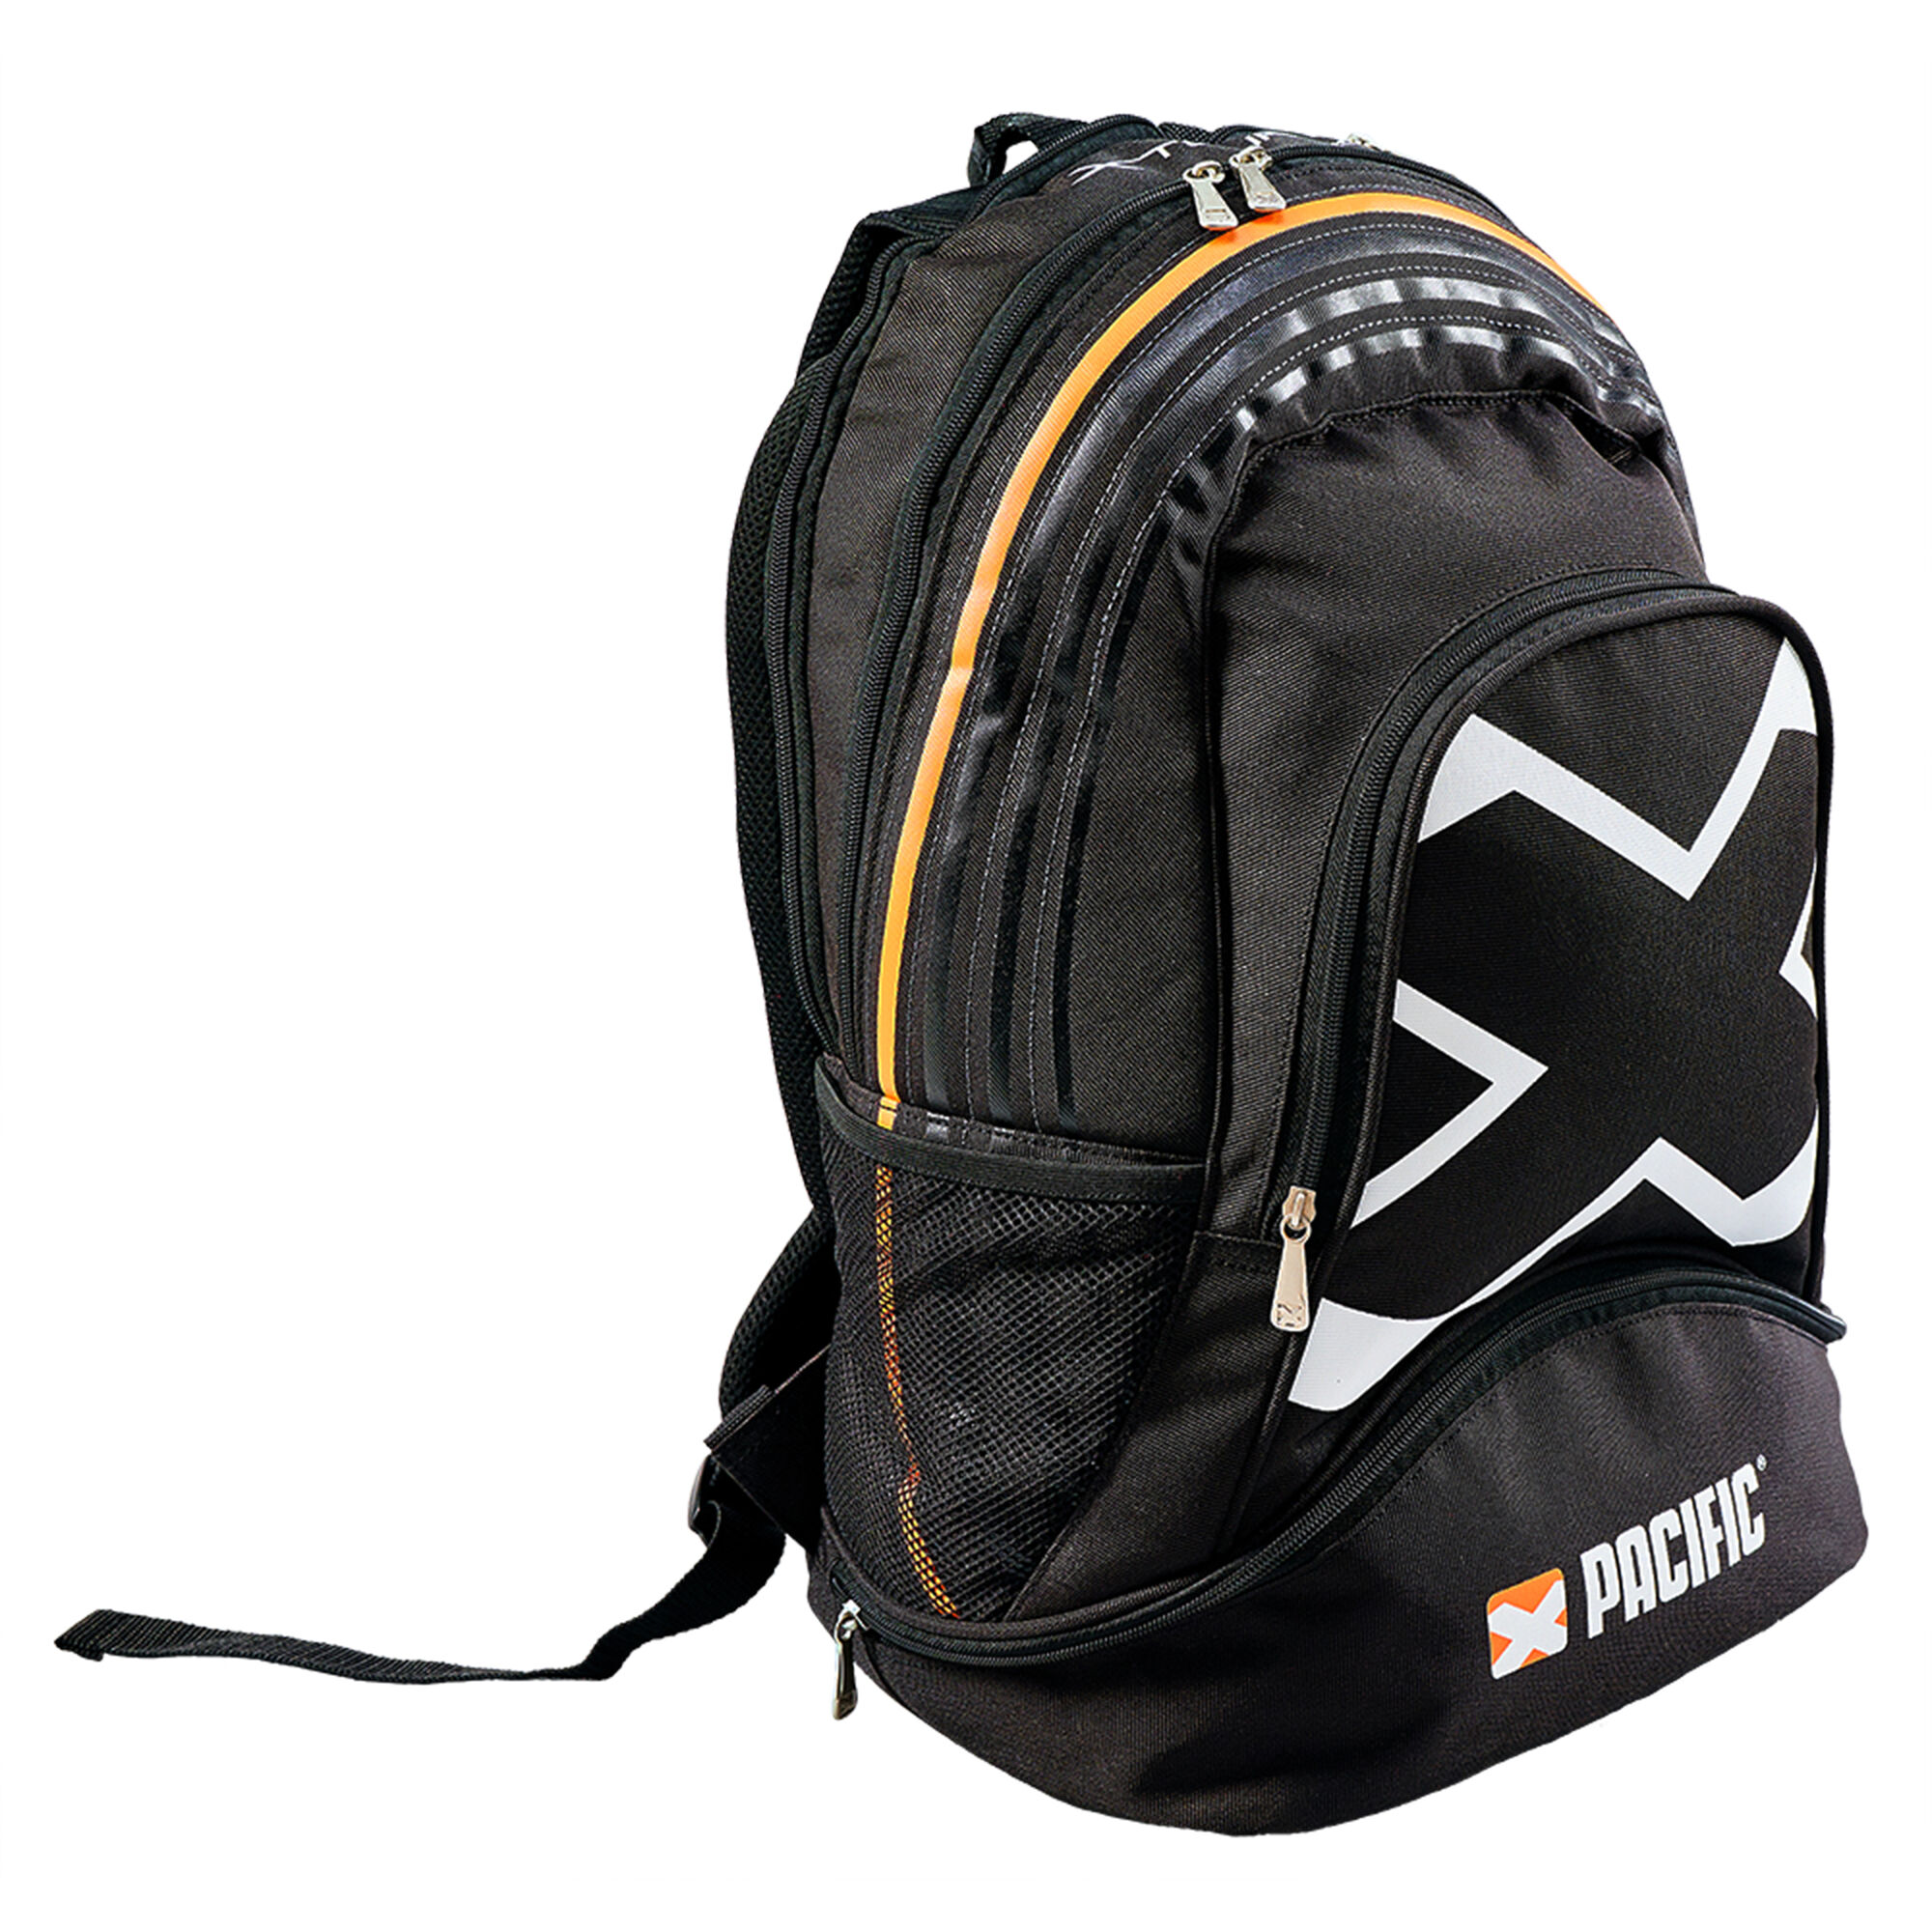 pacific x tour pro backpack